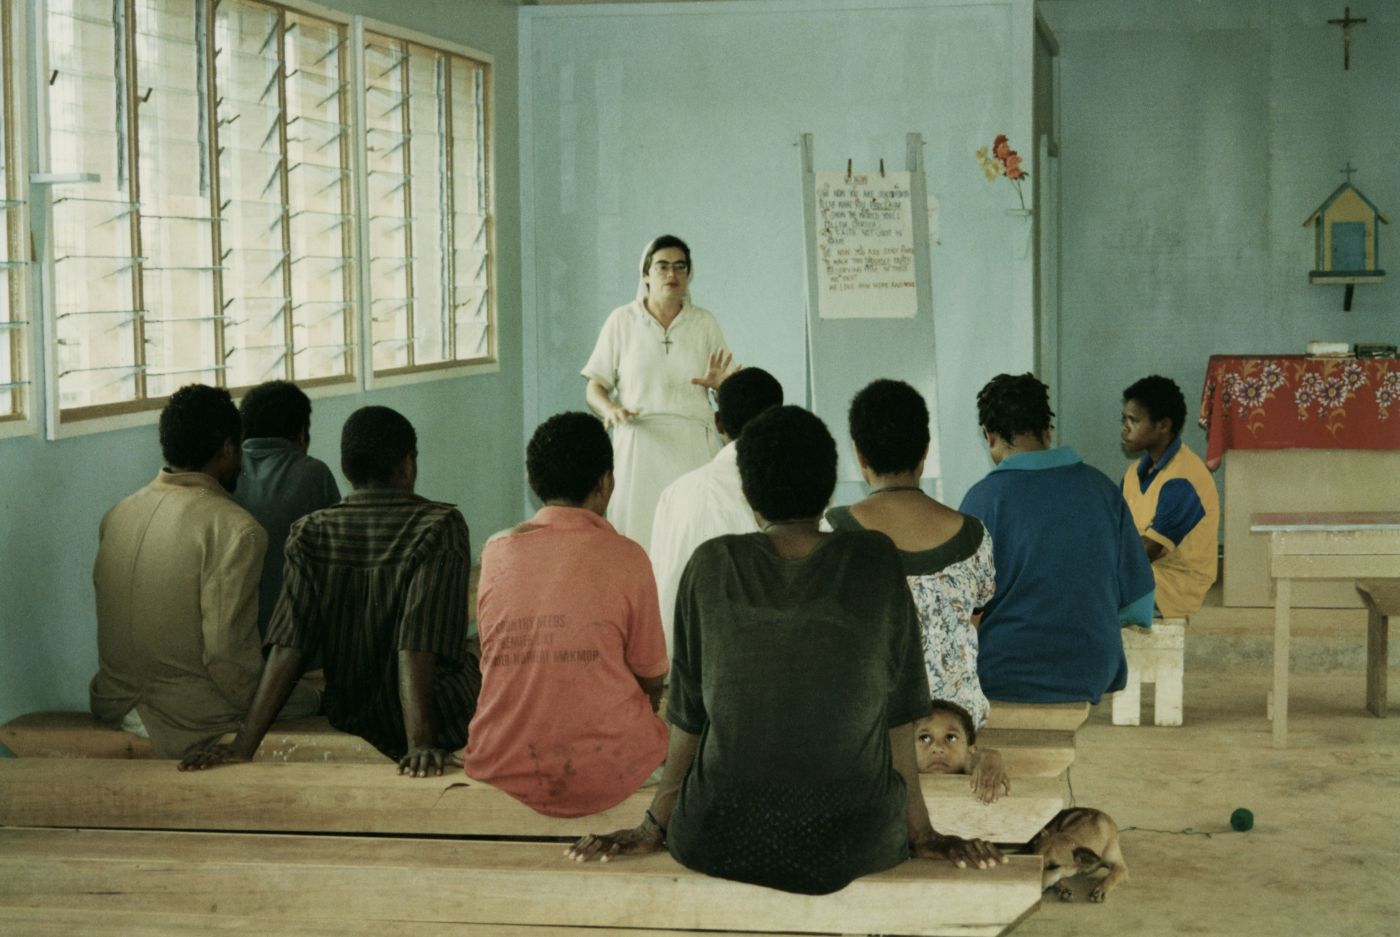 Colour photograph of a middle-aged nun, dressed in white. She is teaching a group of nine black adults in a rudimentary classroom. The students are sitting on wooden benches. A young boy and a dog are also present in the classroom.